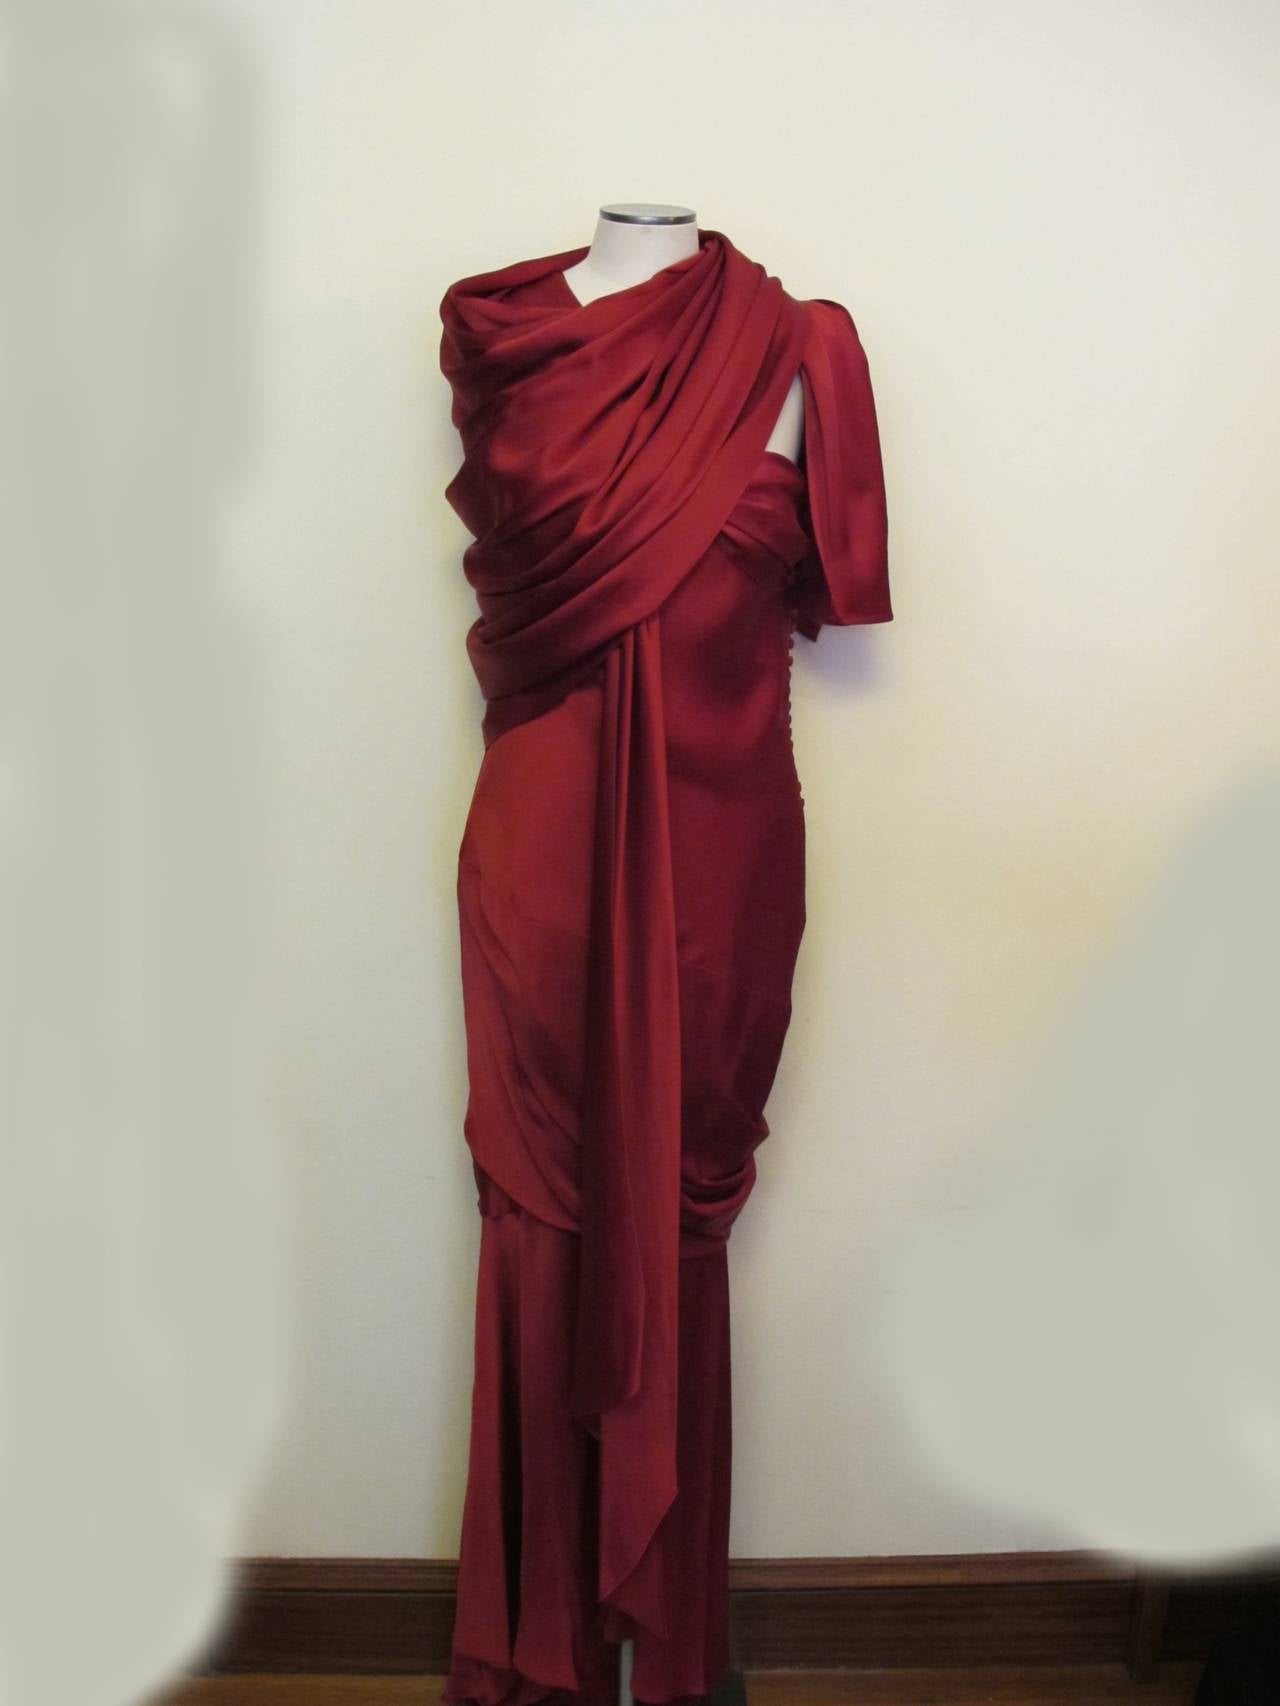 Women's John Galliano 2007 Dramatic Red Evening Gown with Matching Shawl For Sale